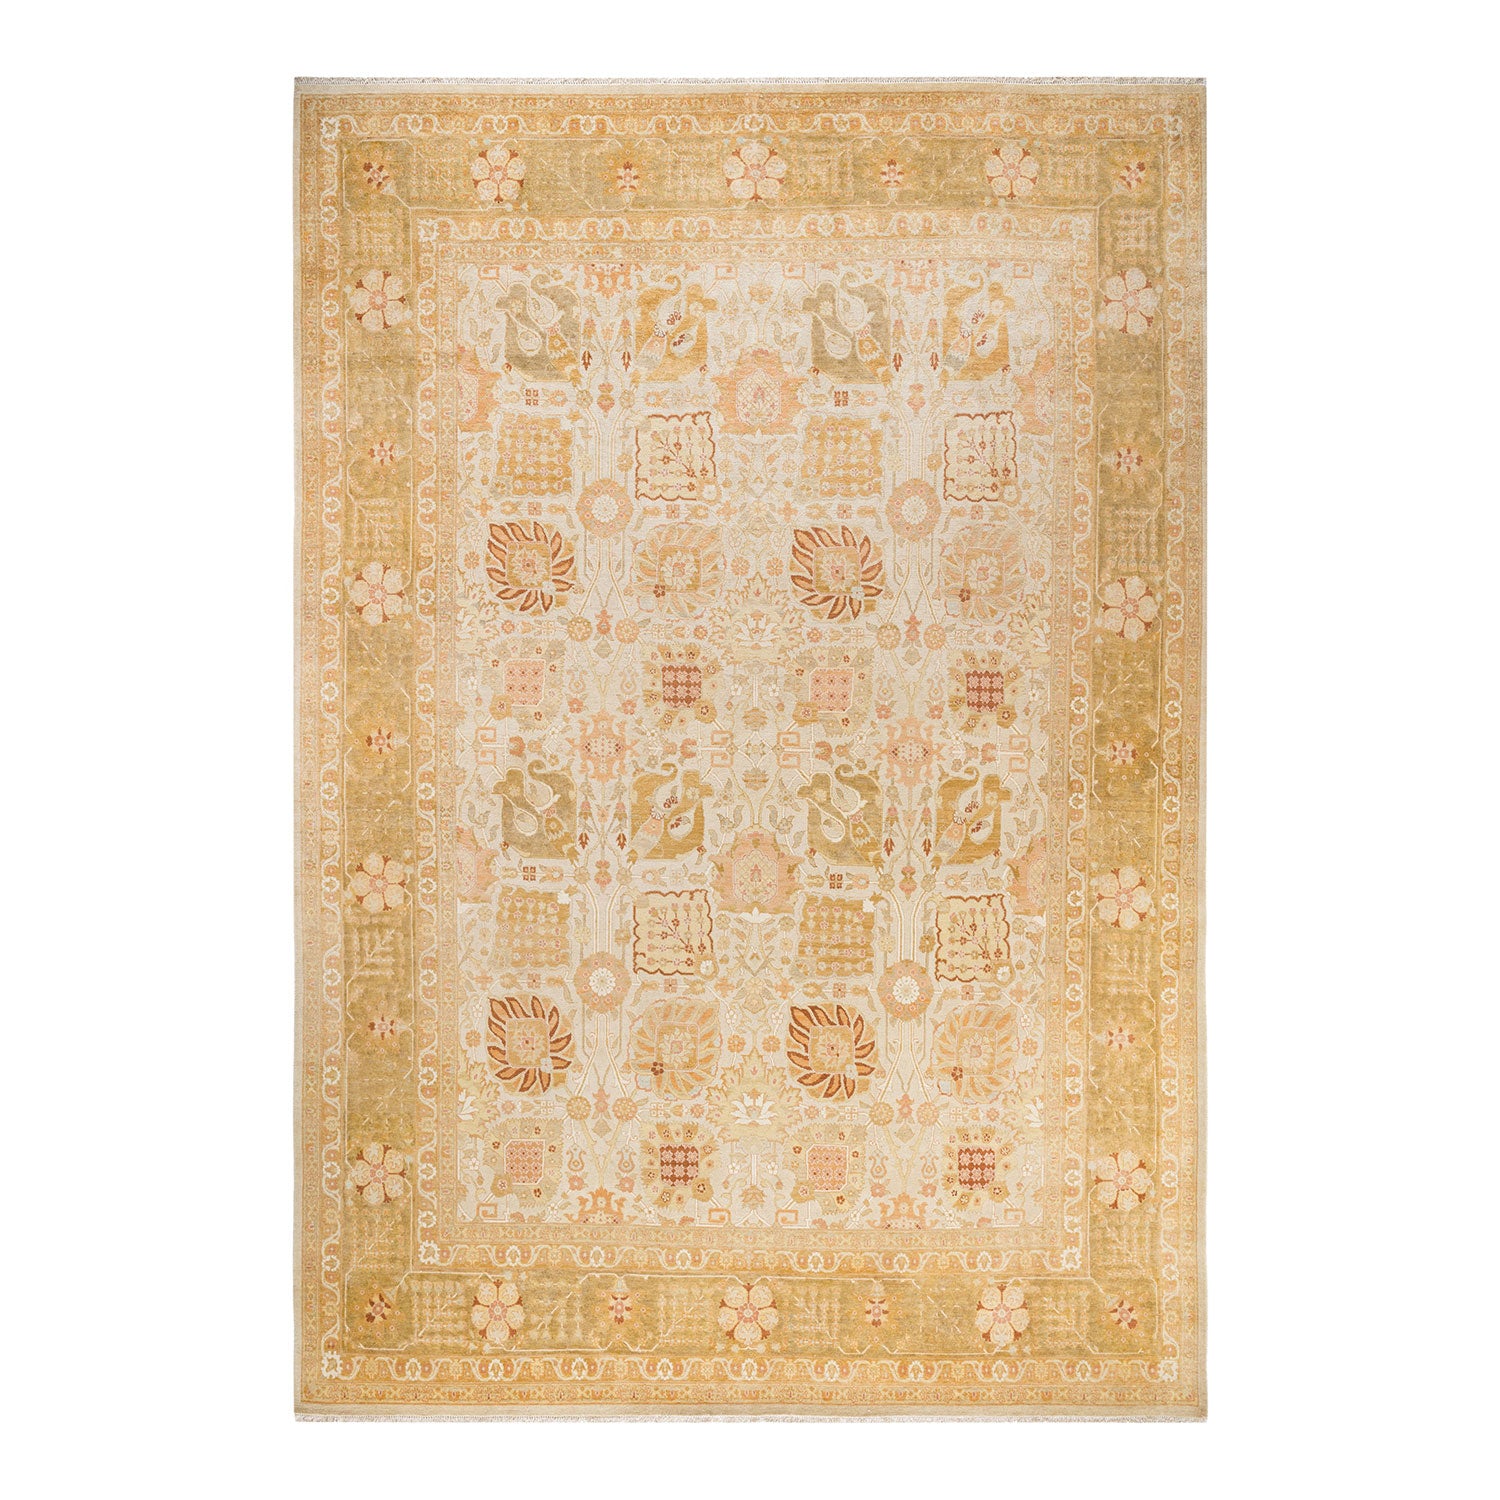 Exquisite handcrafted rug with intricate floral motifs in warm tones.